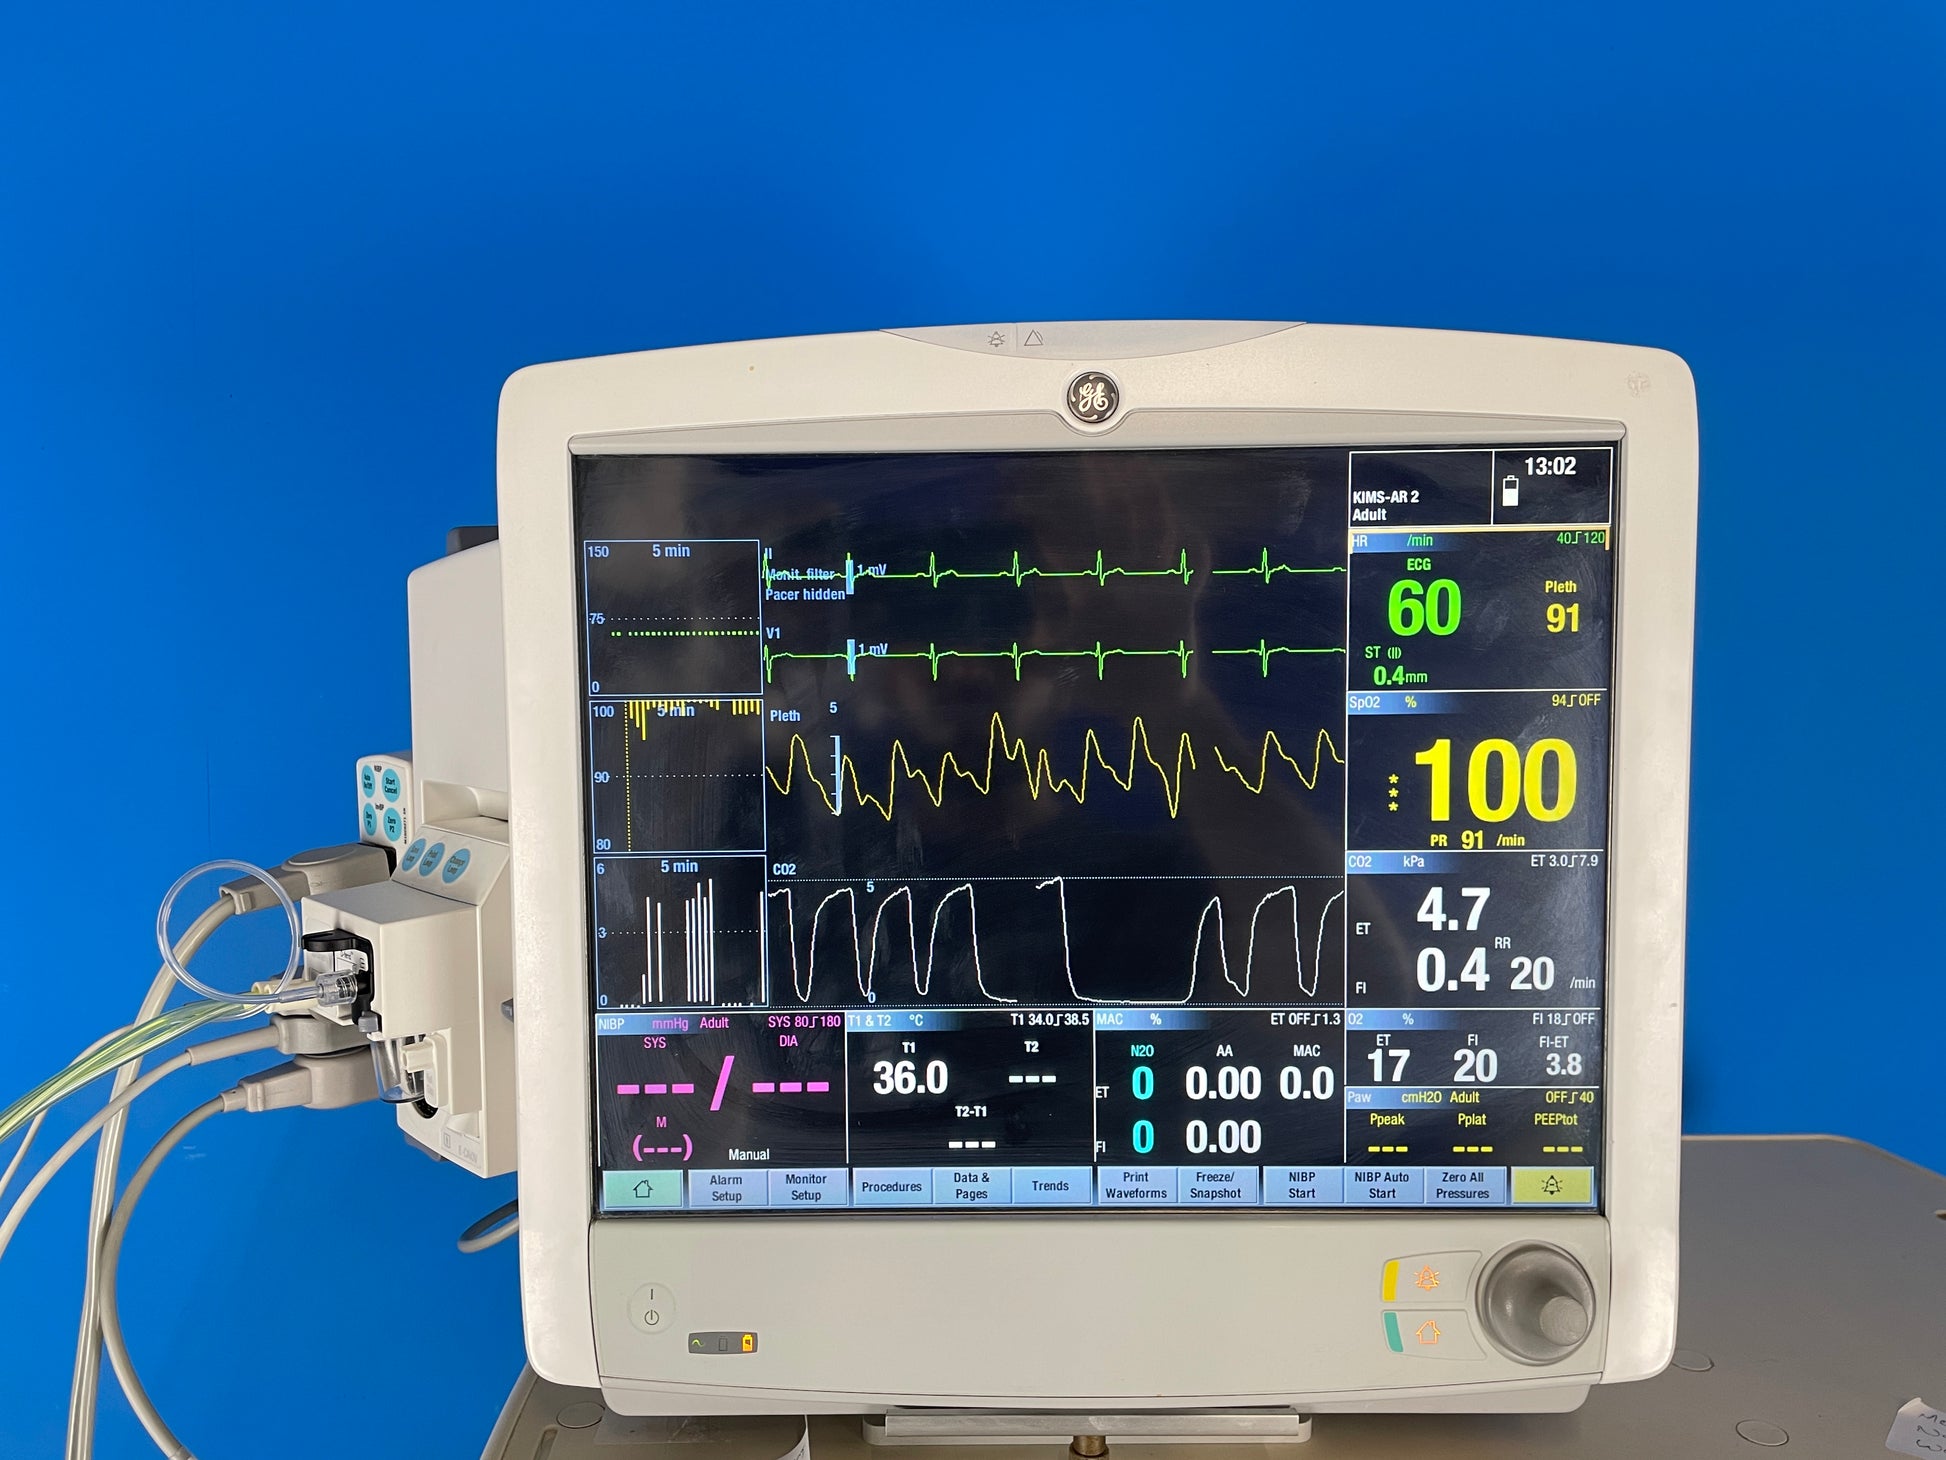 GE Carescape B650 Anesthesia Touch screen Monitor  showing different parameters